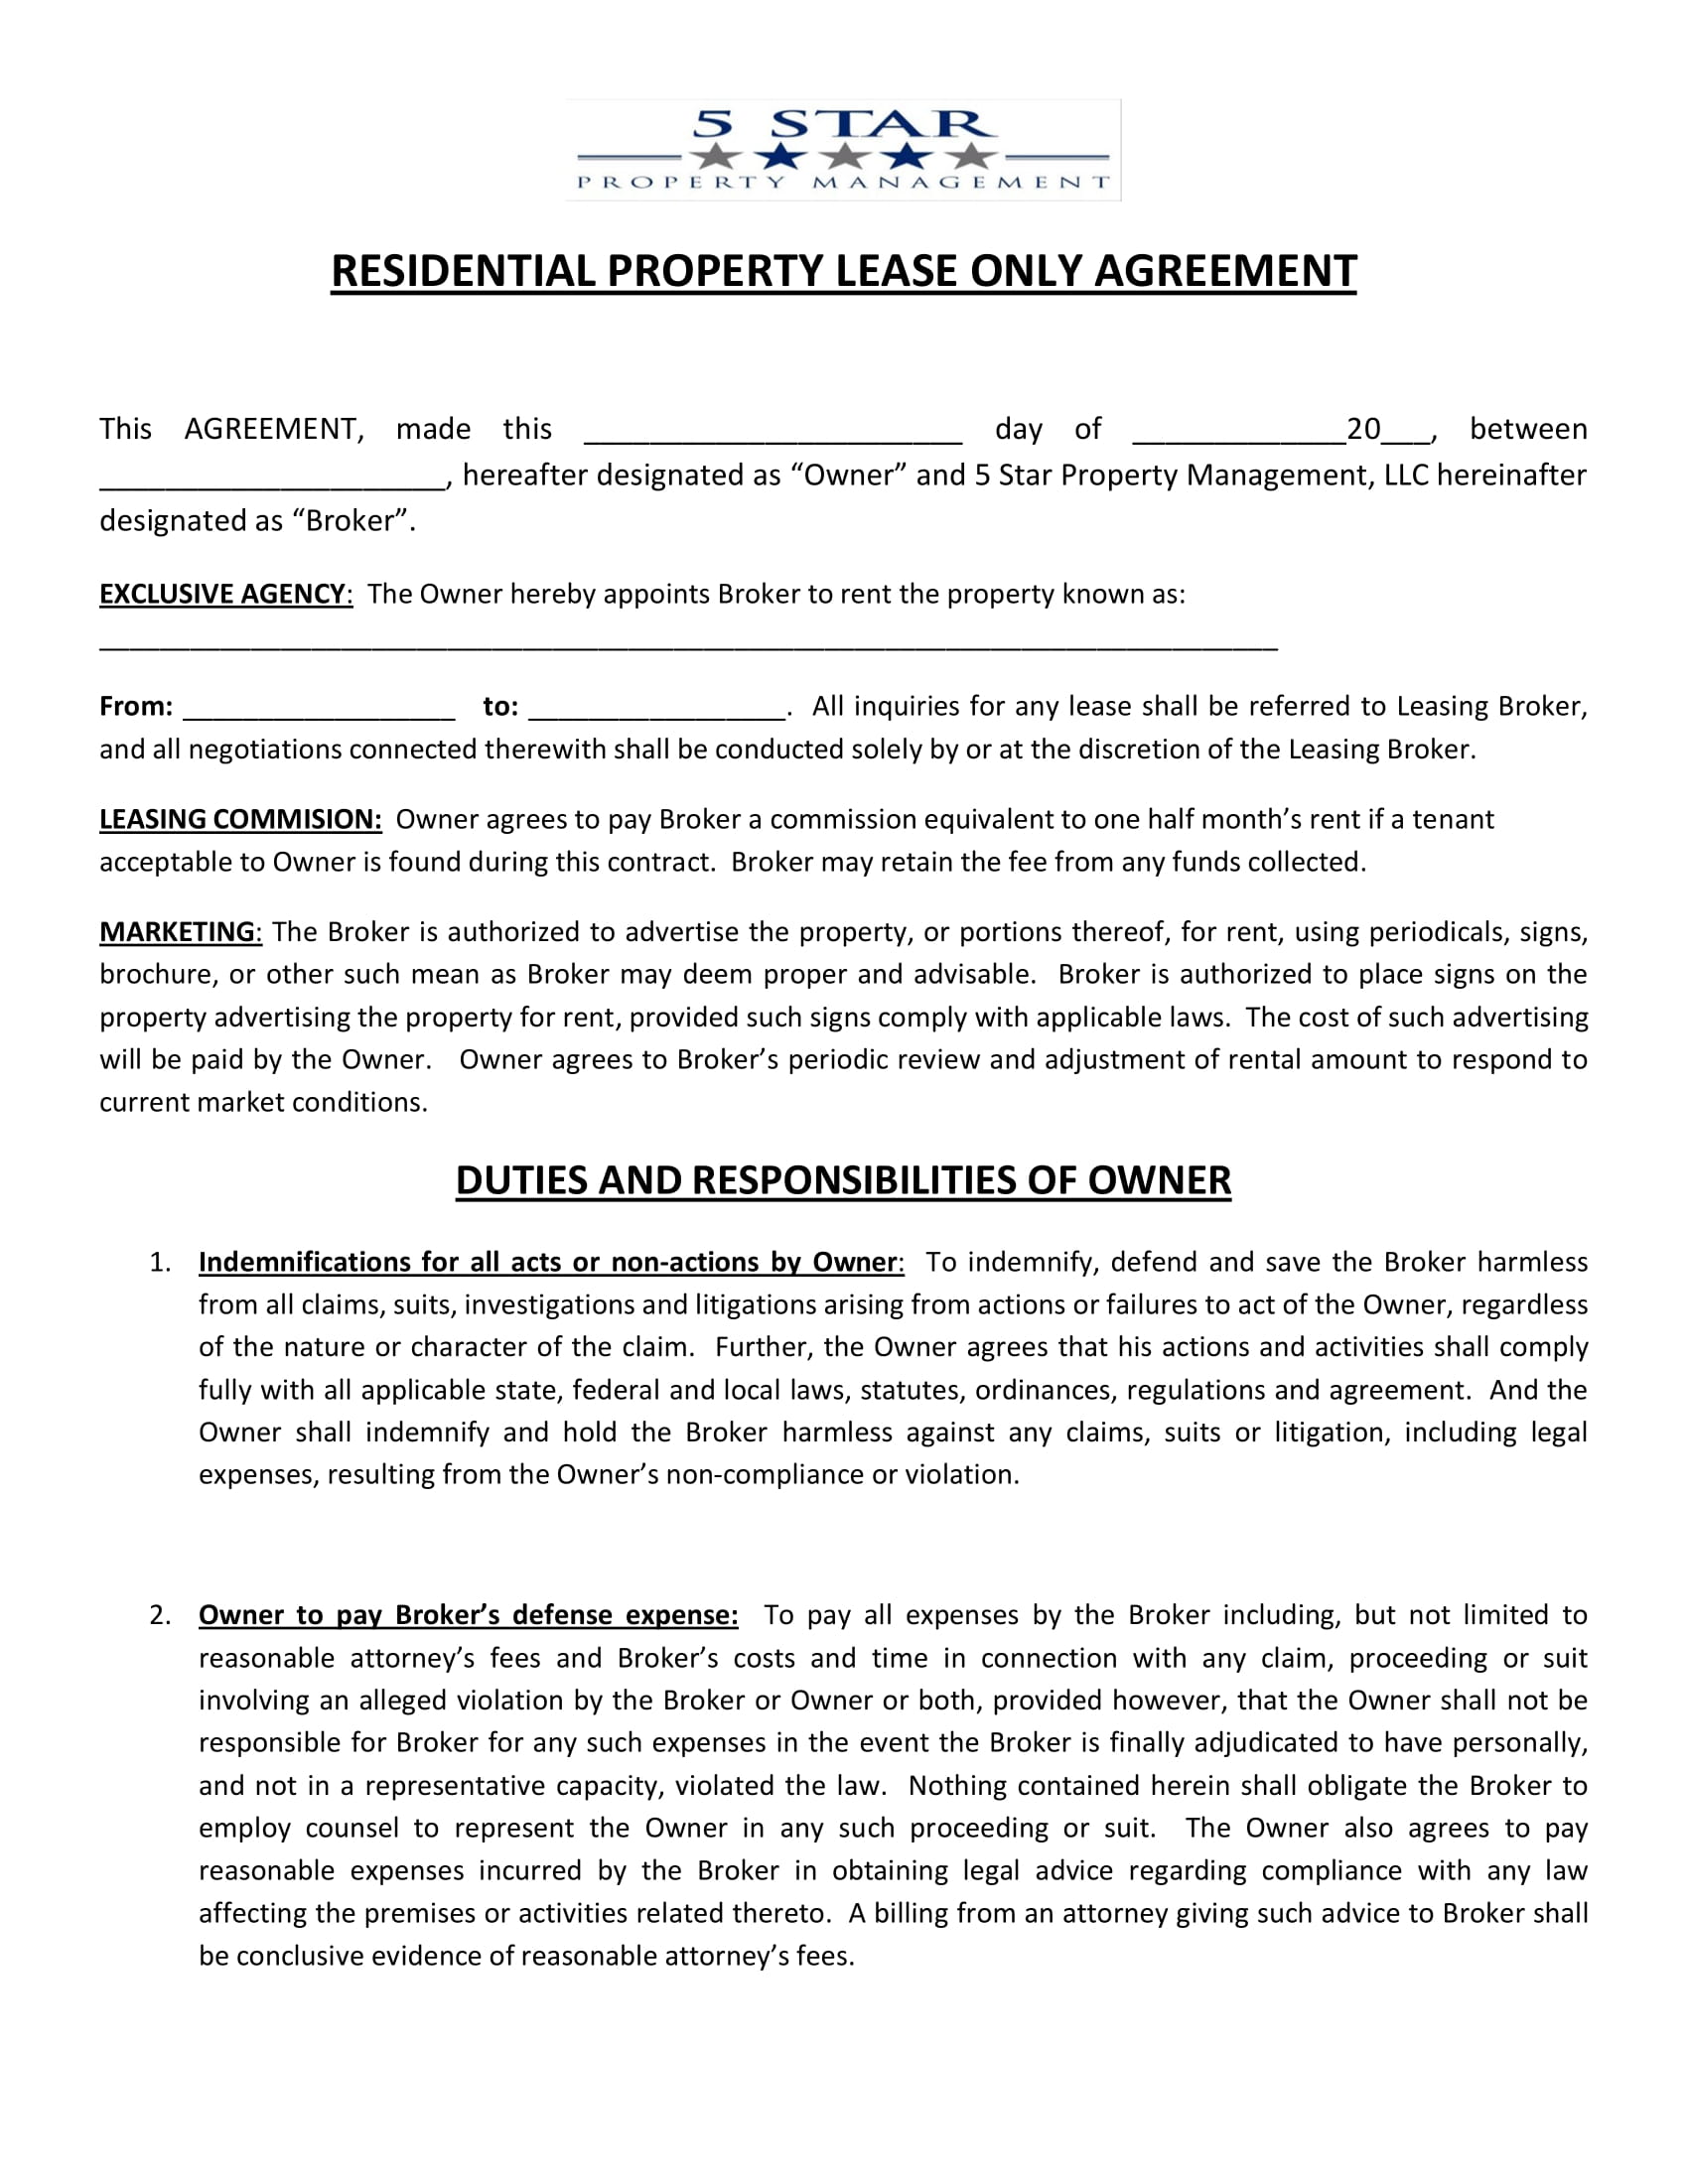 residential property lease only agreement contract form 1